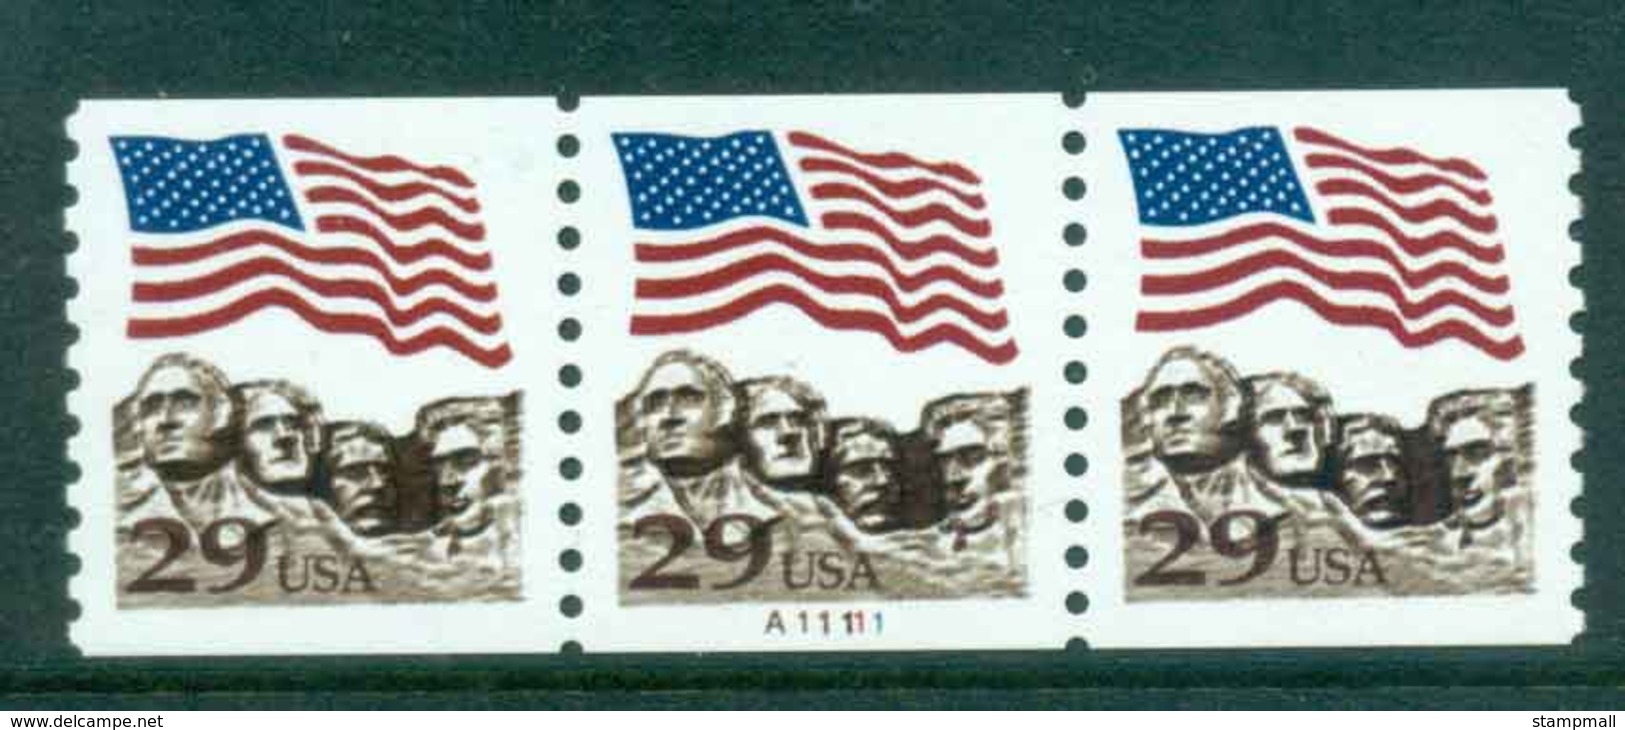 USA 1991 Sc#2523A 29c Flag Over Mt Rushmore Photogravure Coil P#A11111 Str 3 MUH Lot47516 - Rollen (Plaatnummers)